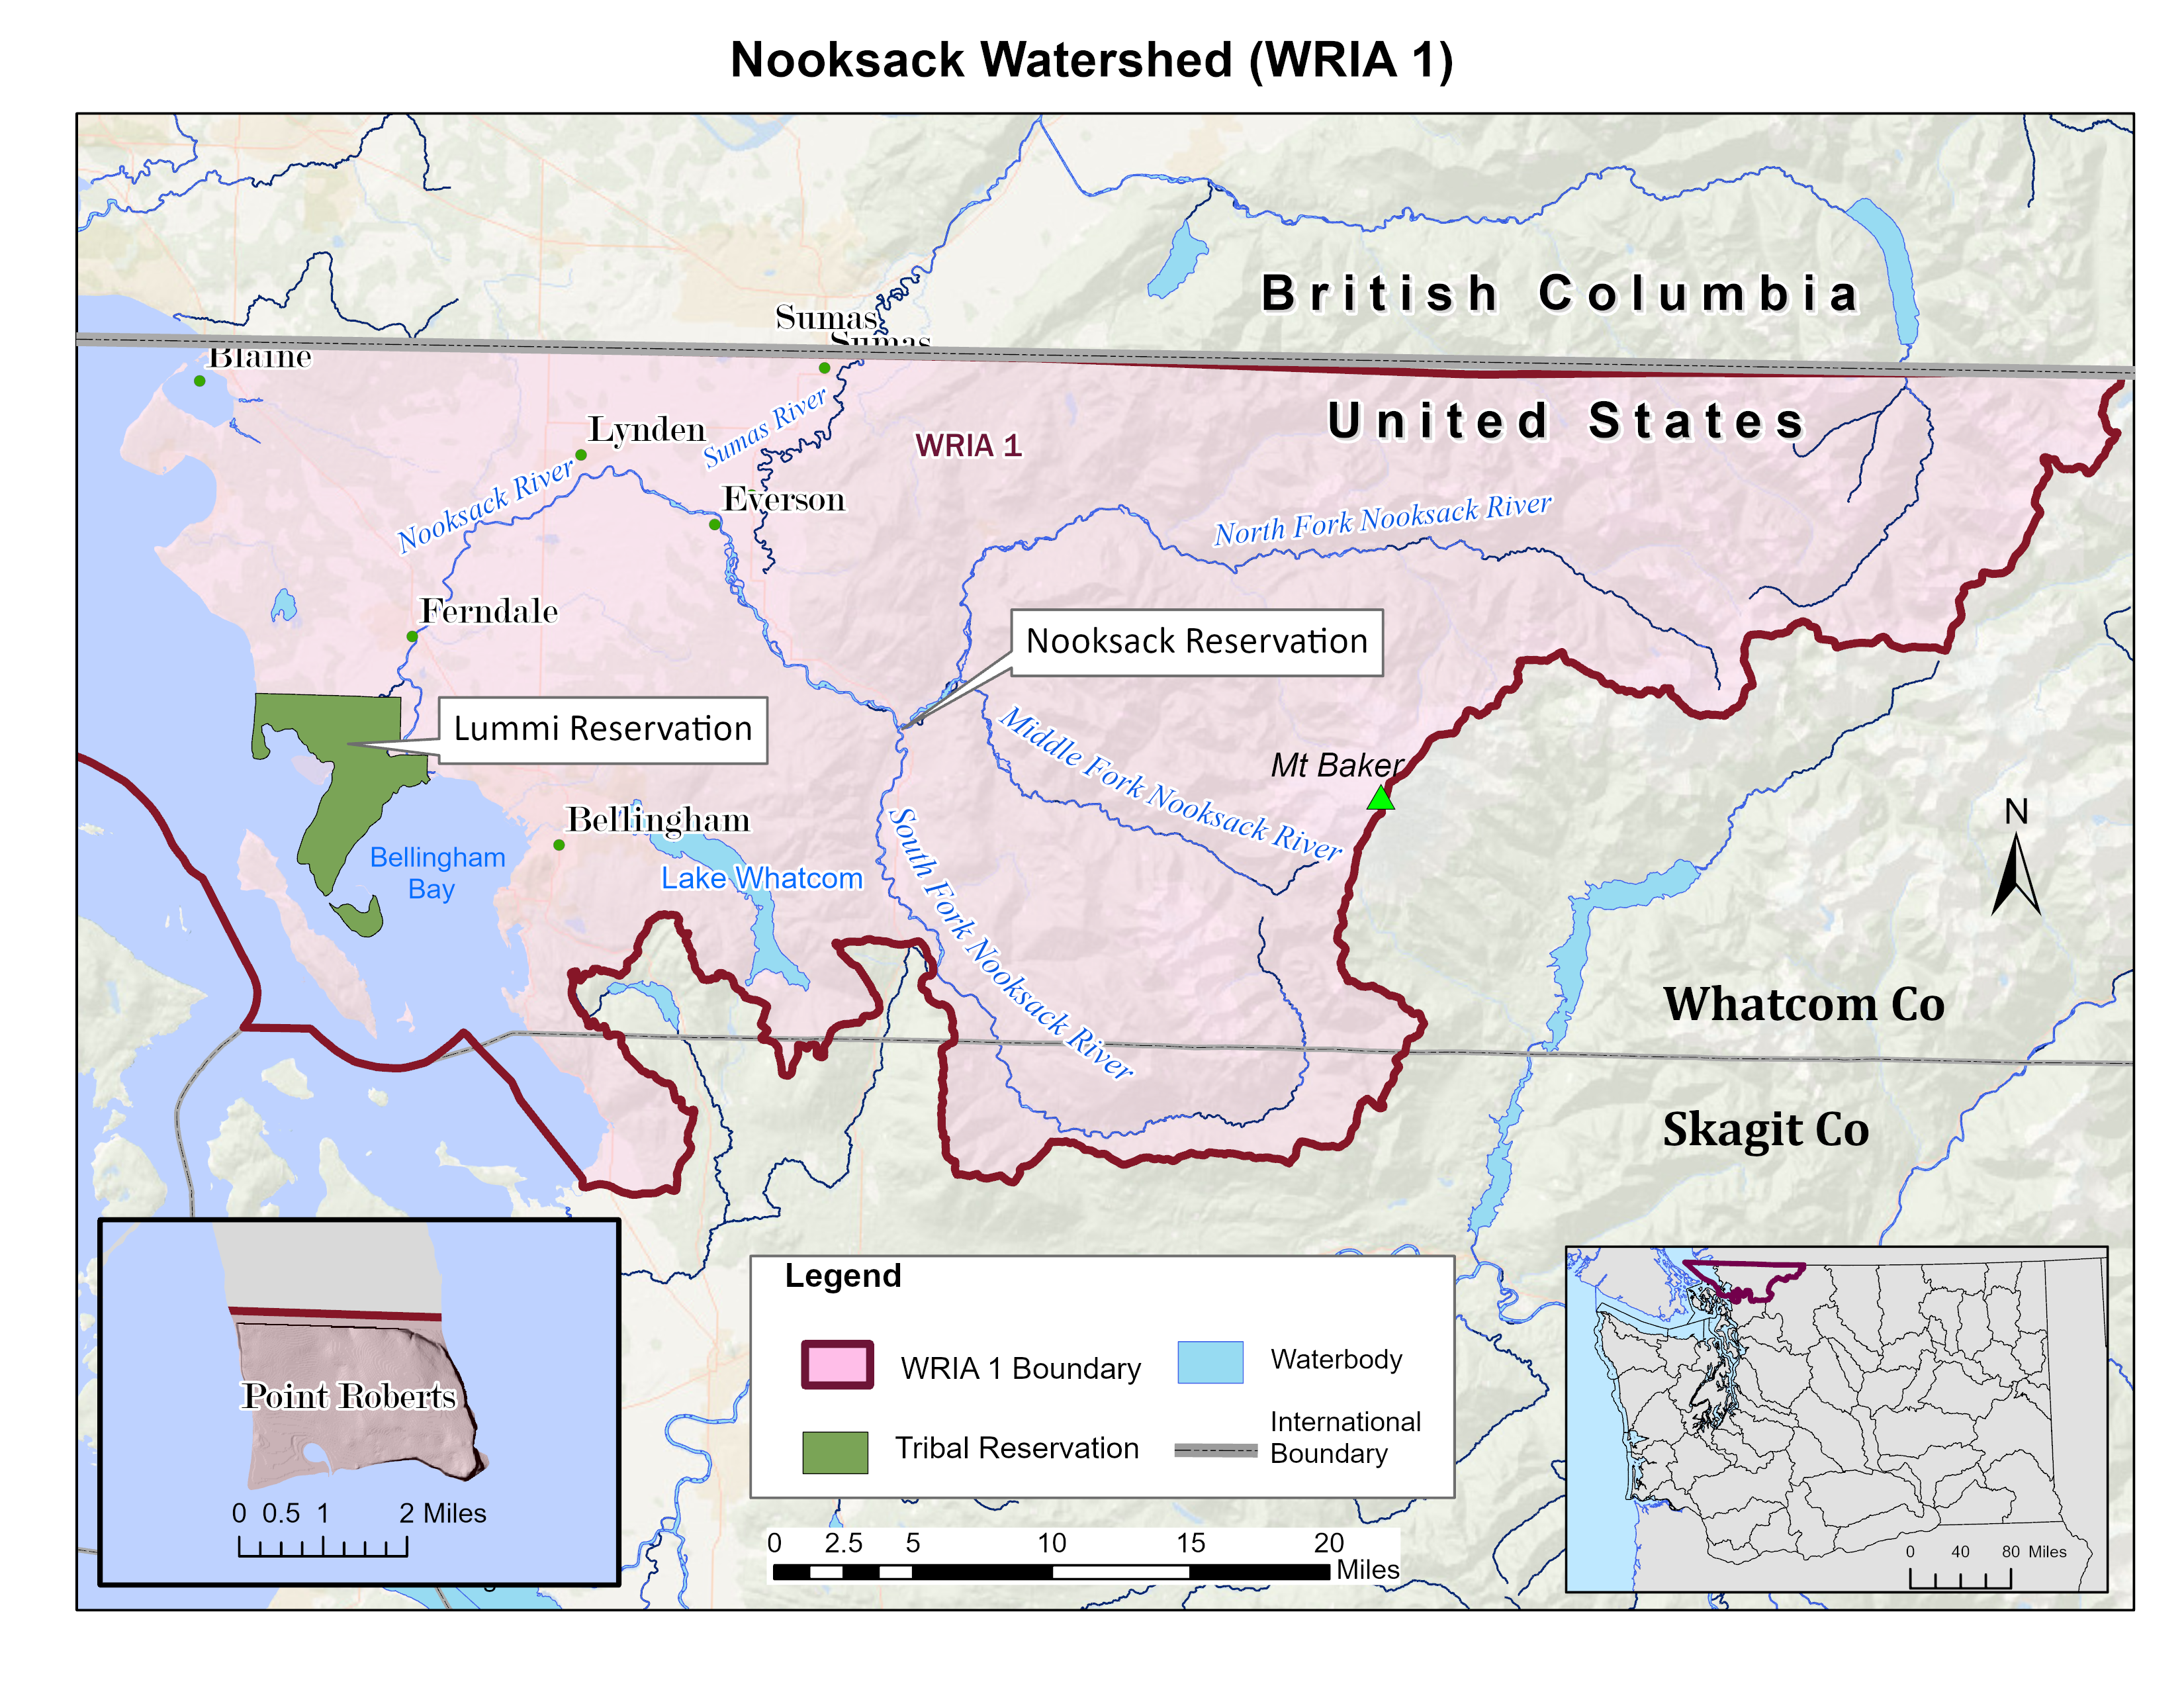 Washington state map with location of WRIA 1 Nooksack watershed